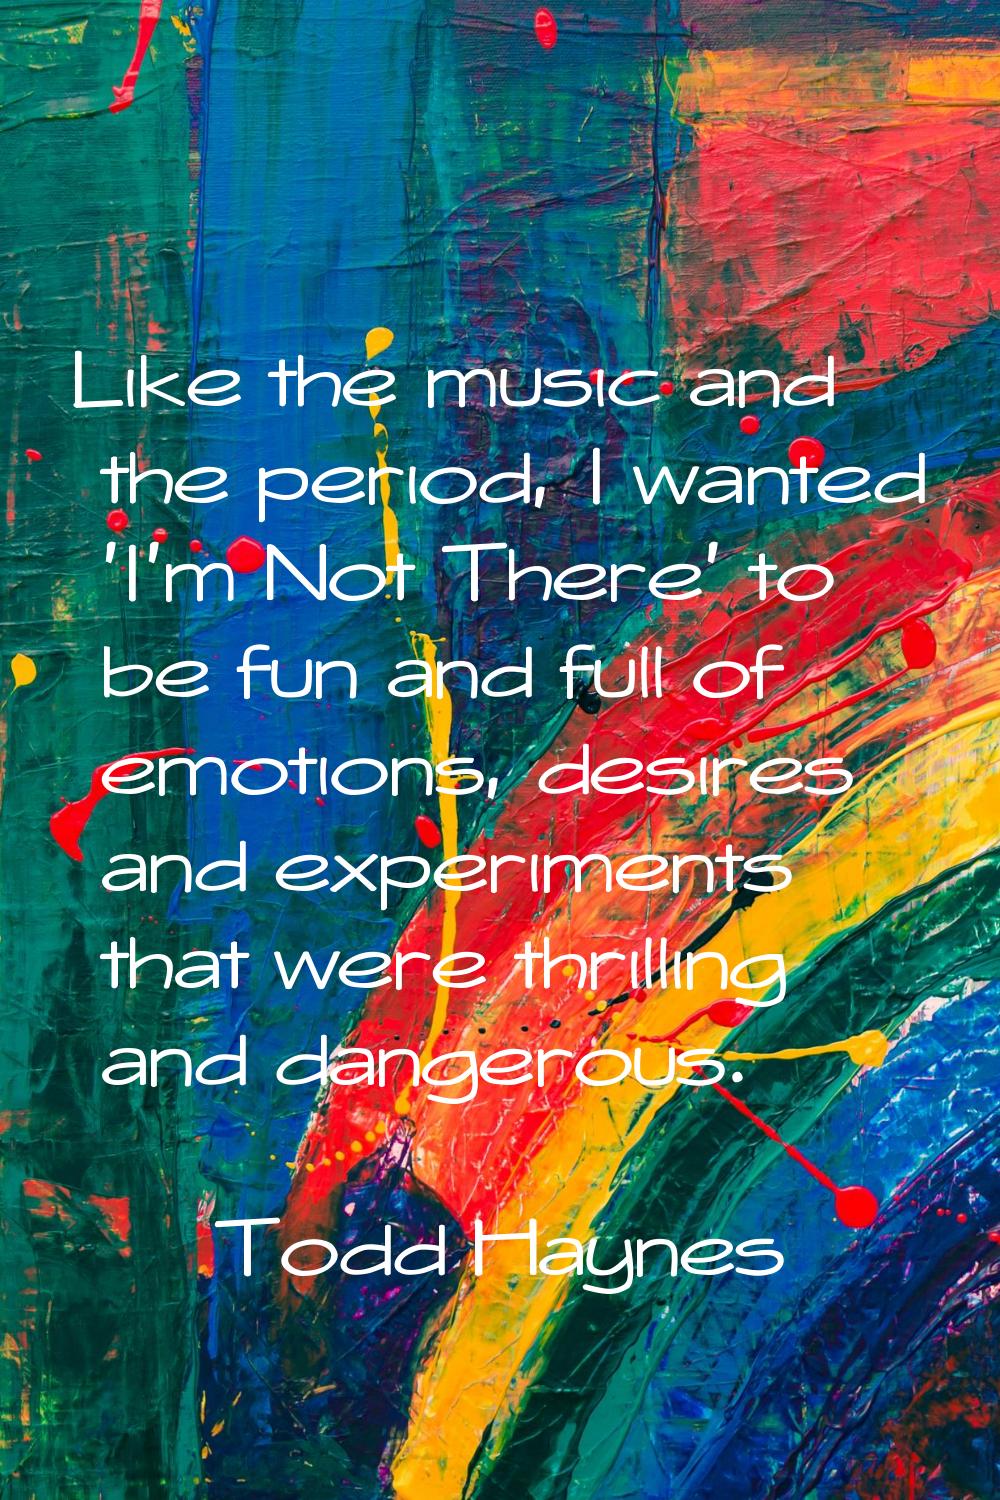 Like the music and the period, I wanted 'I'm Not There' to be fun and full of emotions, desires and